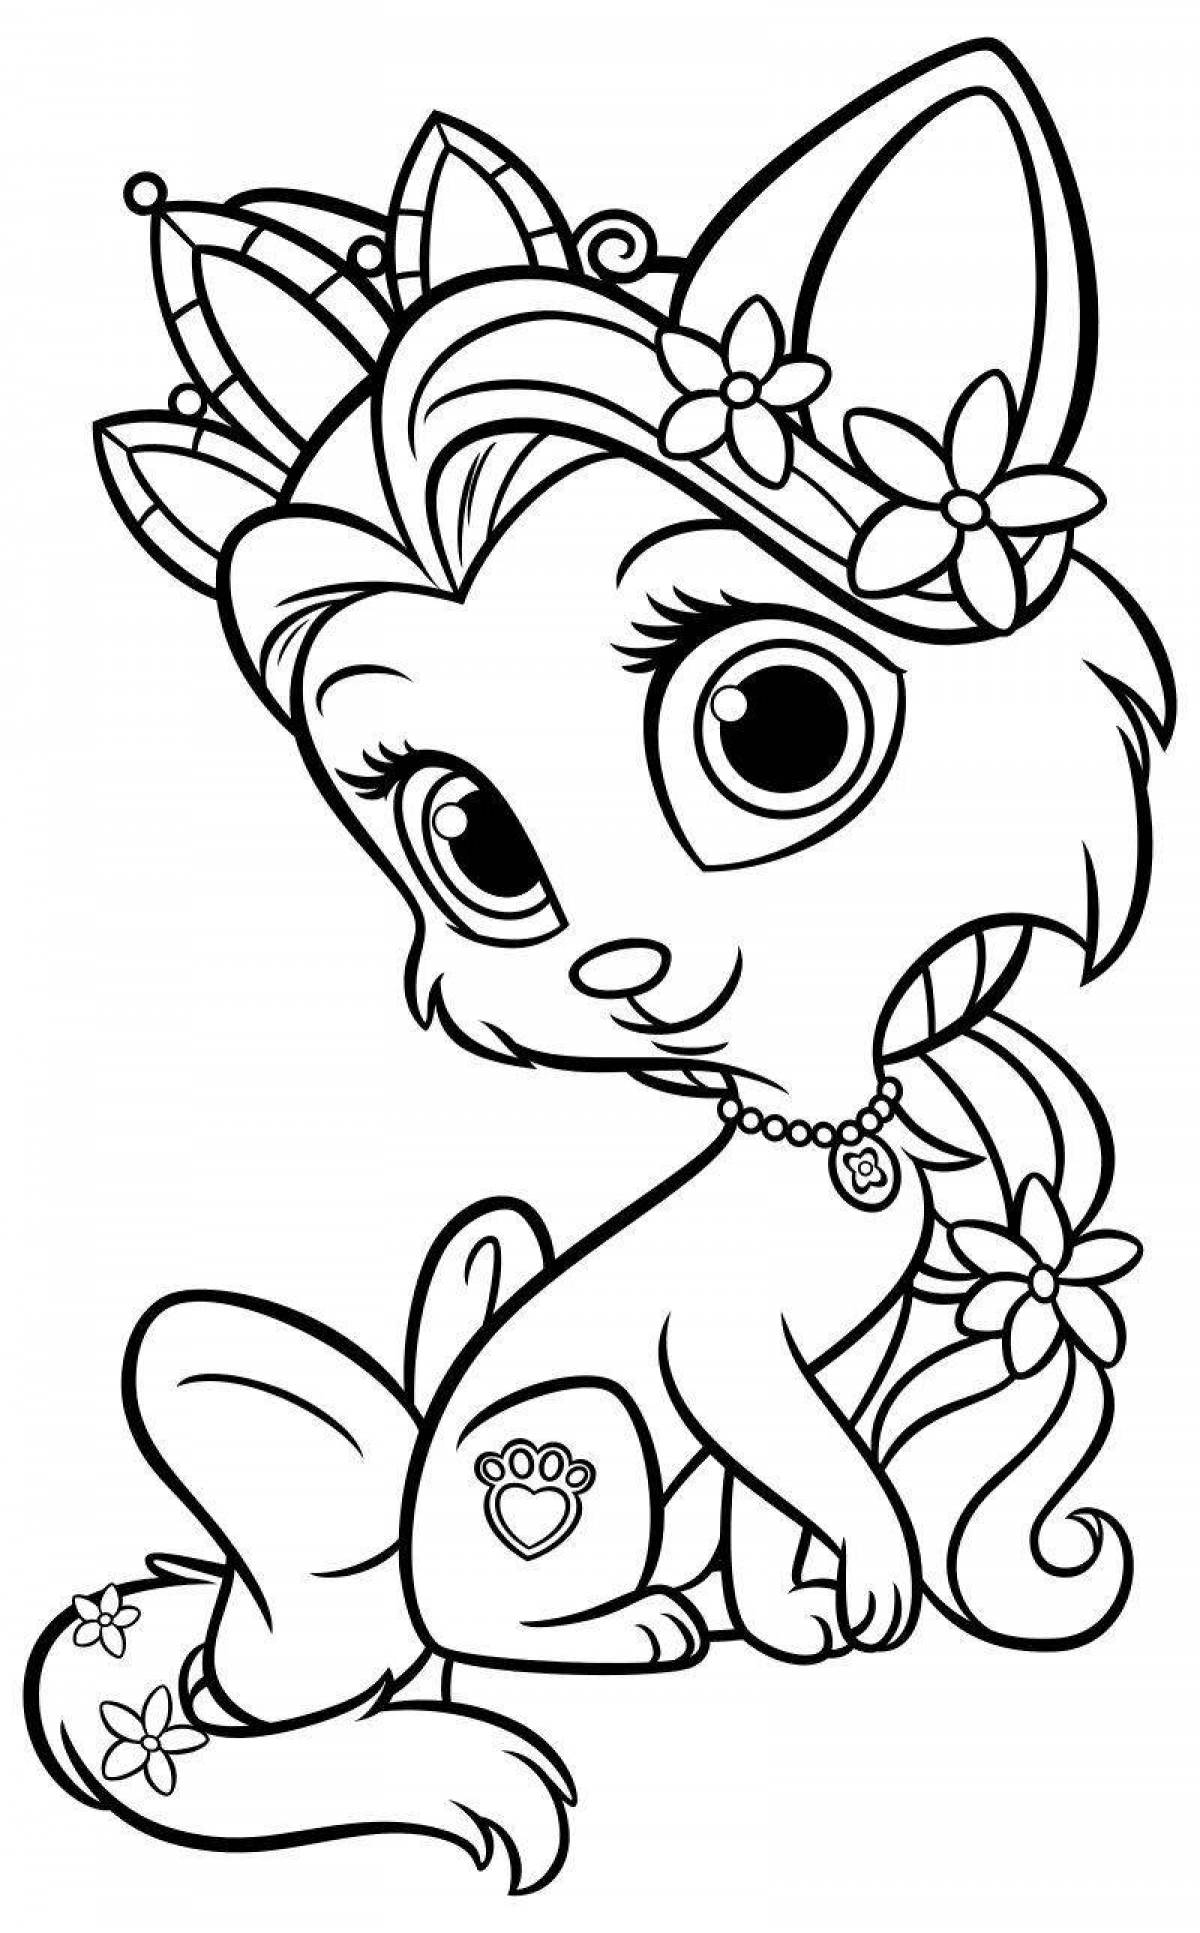 Exquisite coloring book for girls with 9 year old animals